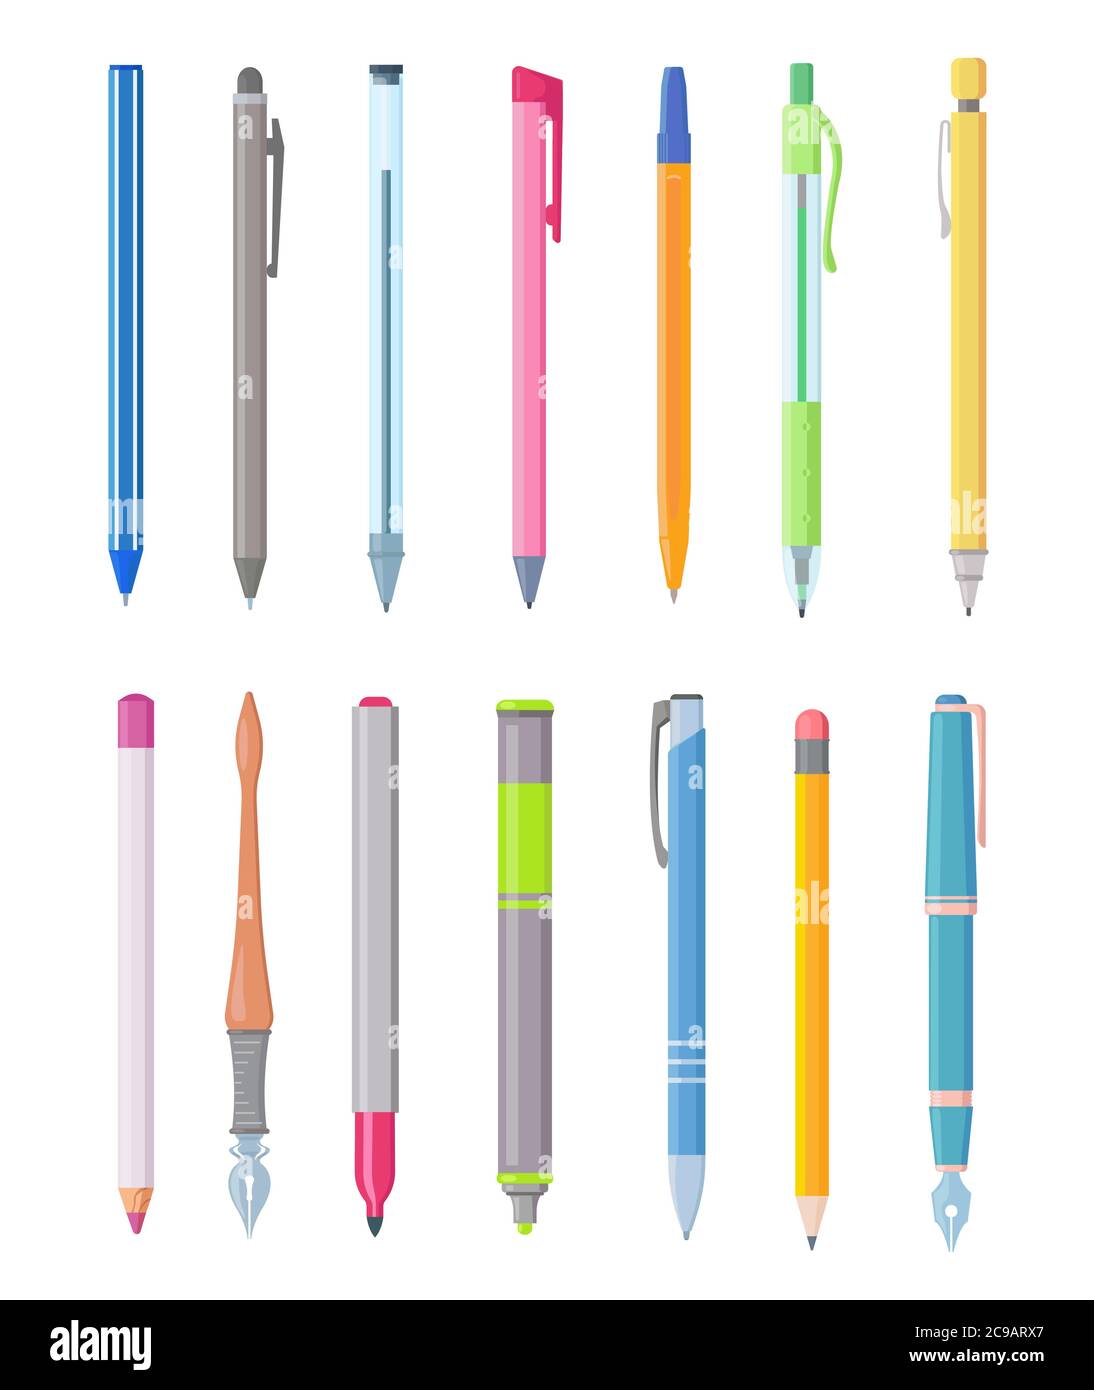 Cartoon pen and pencils. Set of simple drawing items isolated on white. Stock Vector